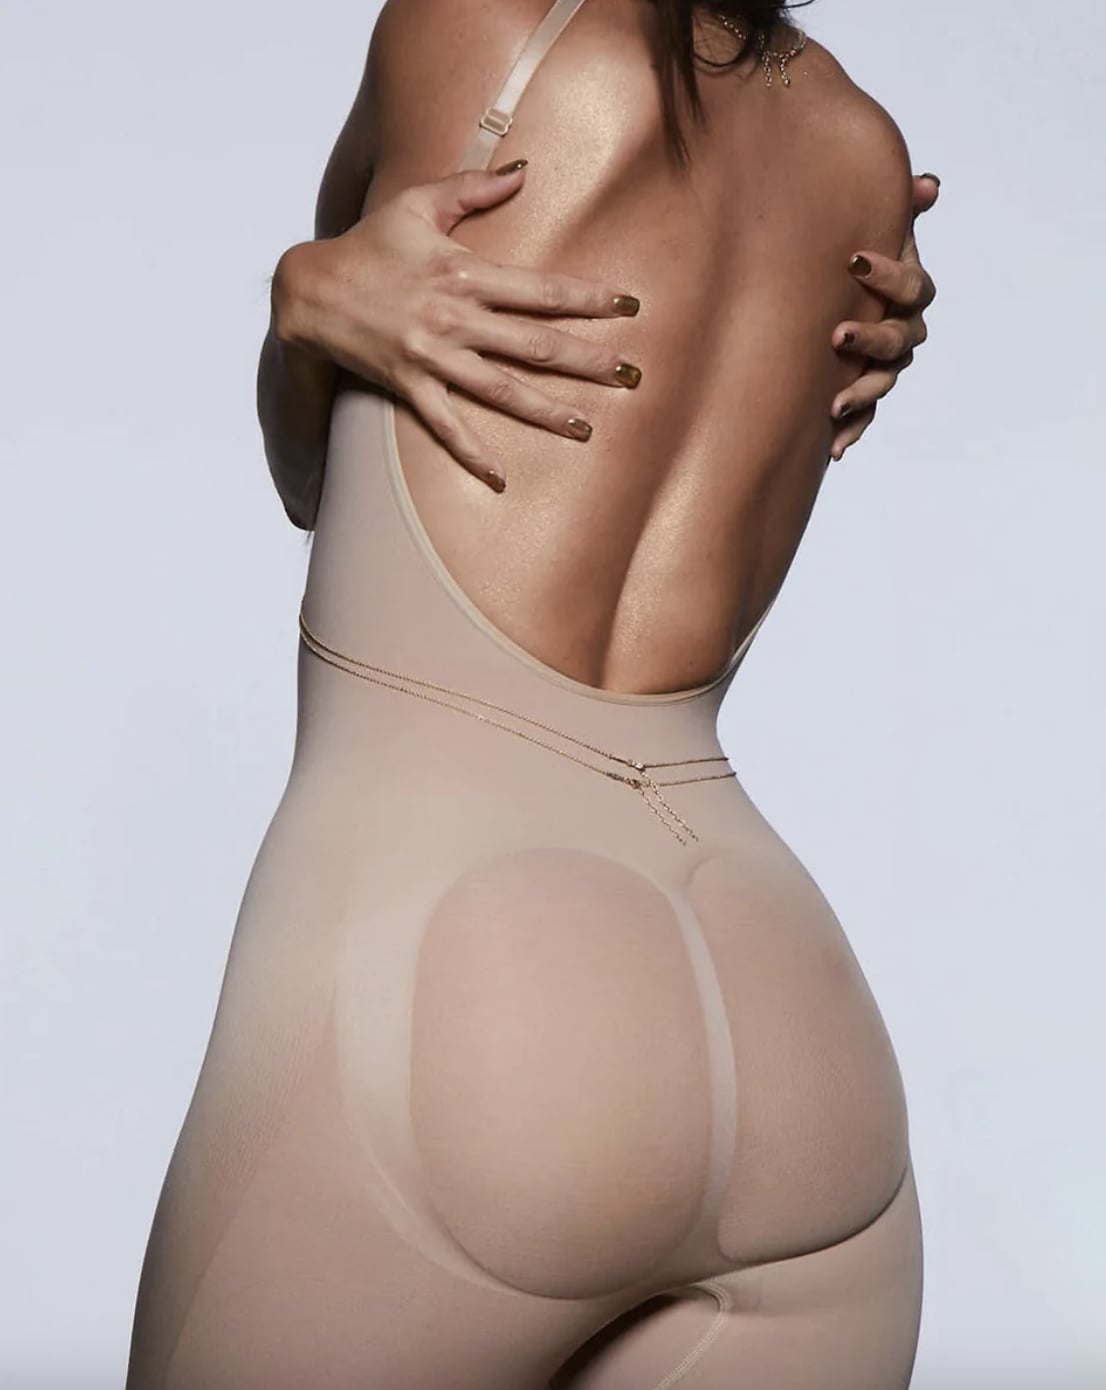 kimkardashian in the new #SKIMS Barely There Shapewear Low Back Short